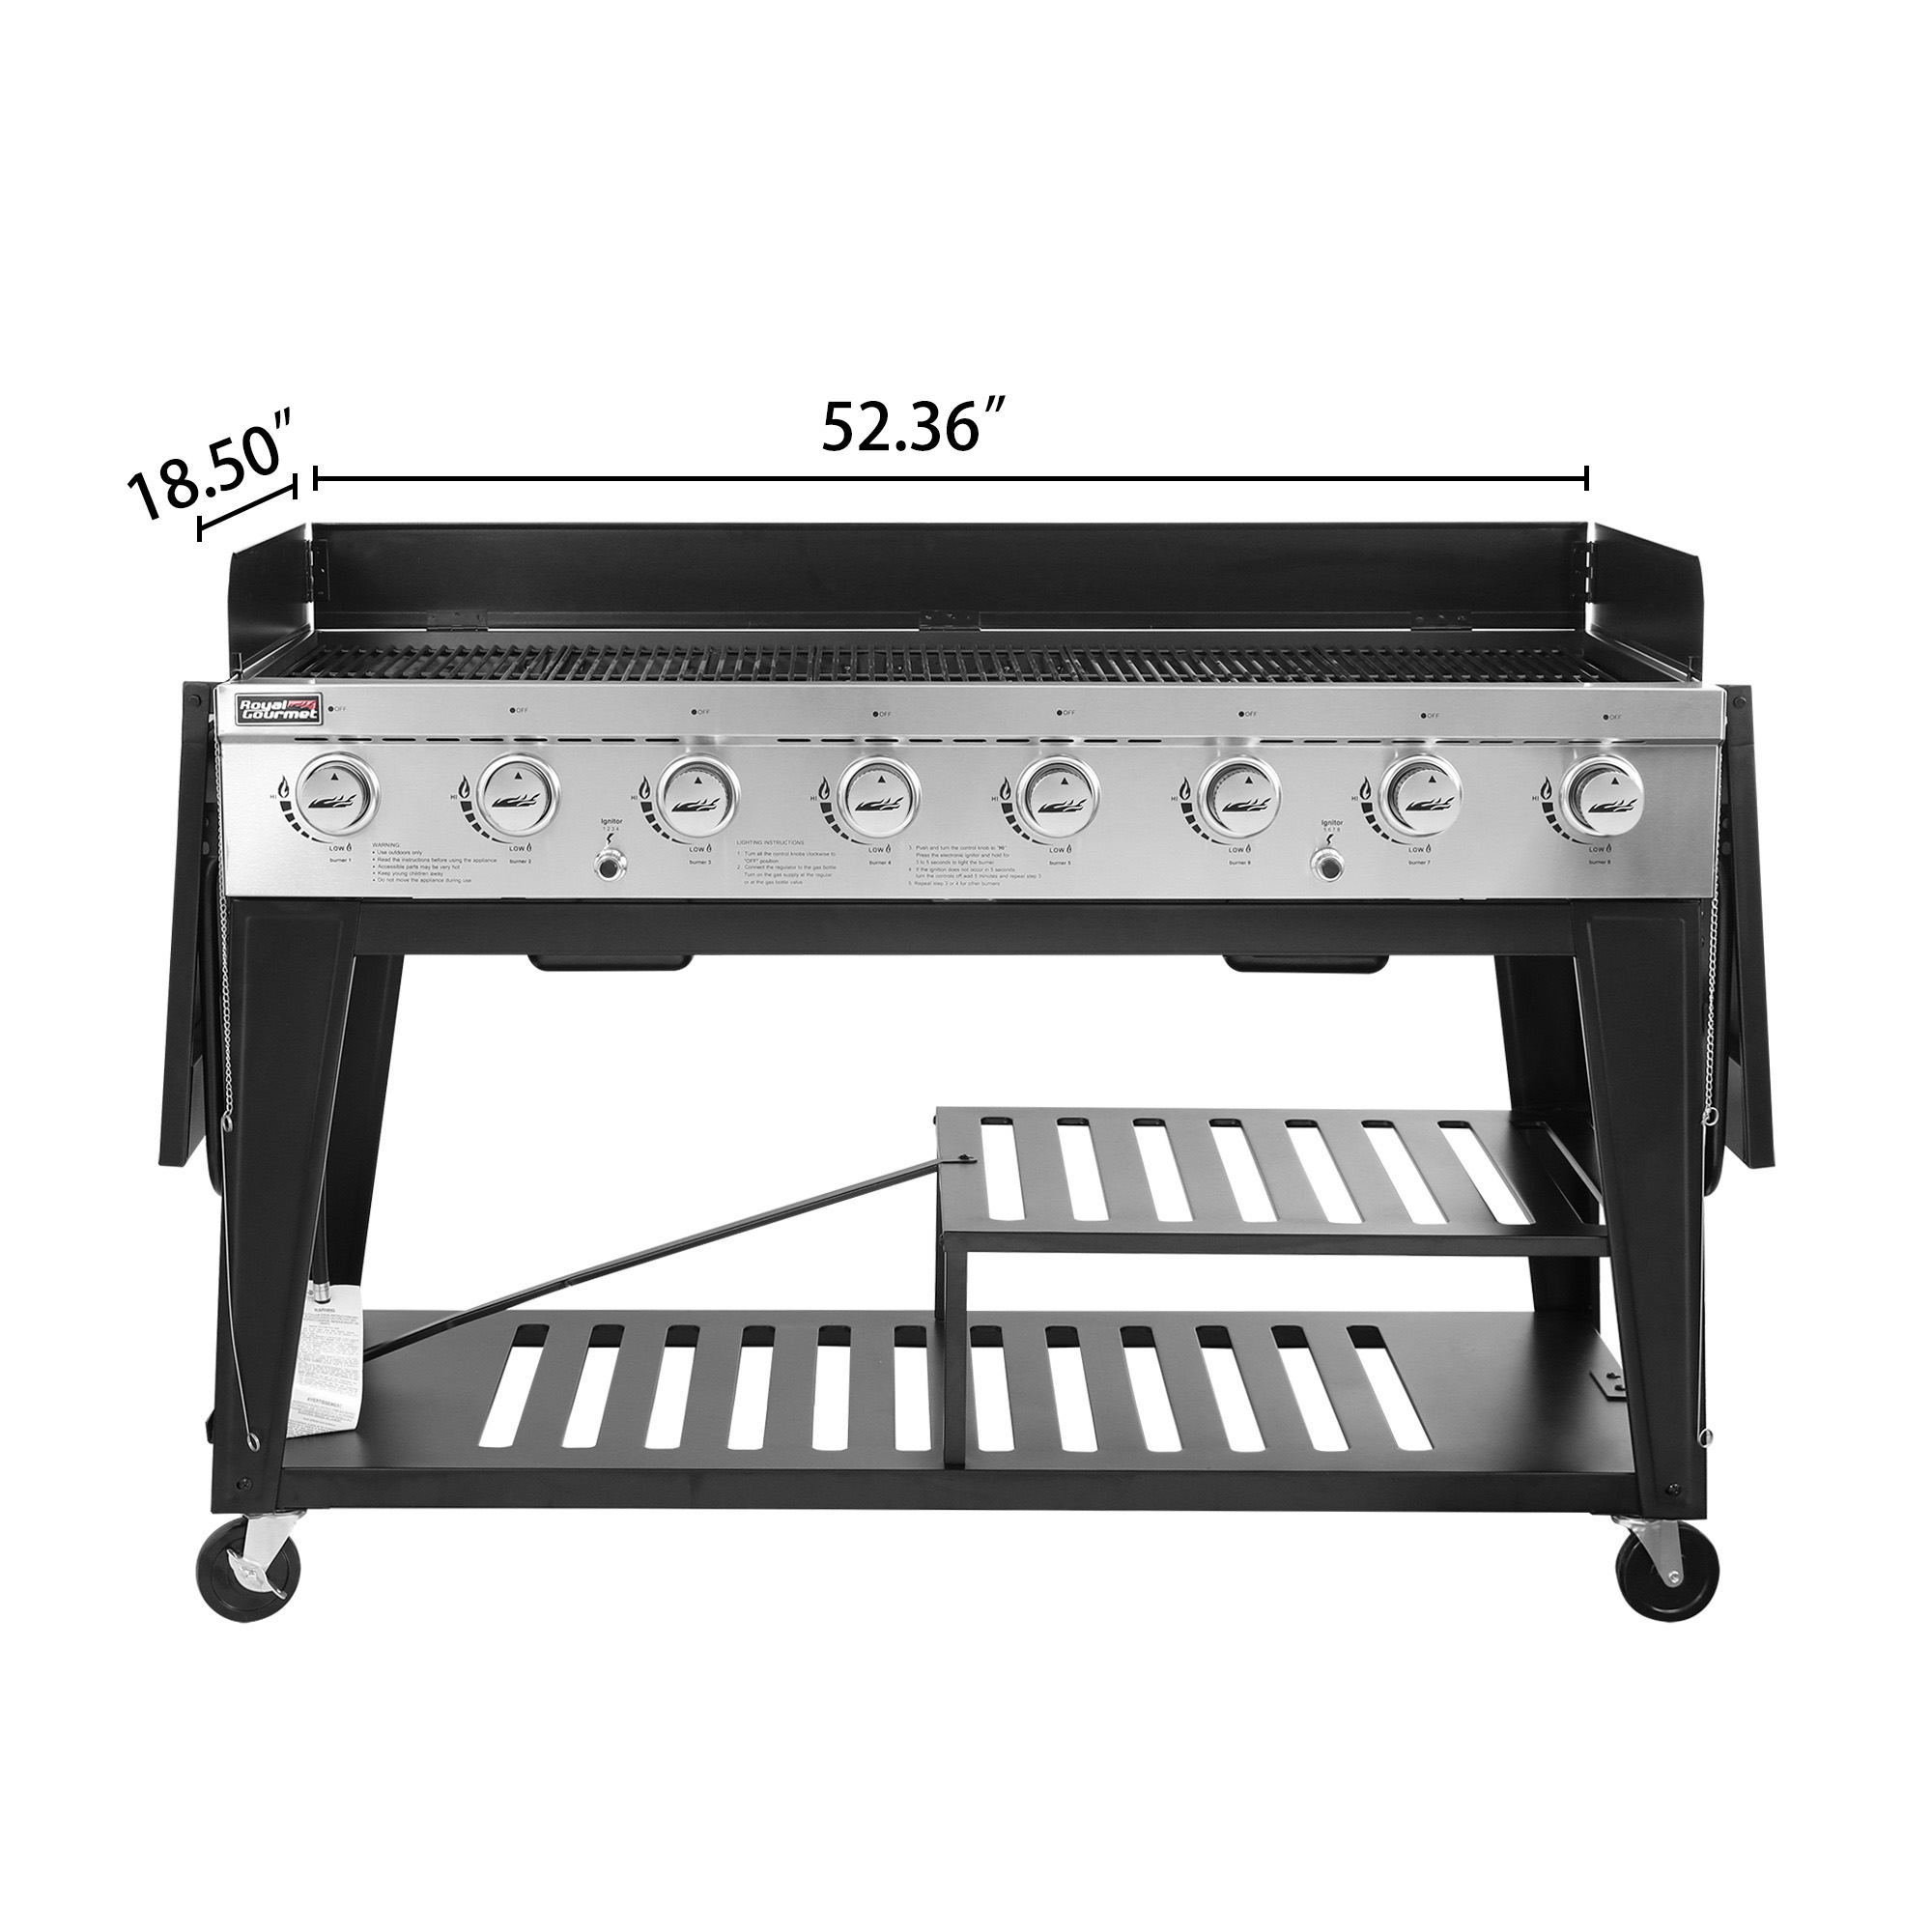 Royal Gourmet GB8001 8-Burner BBQ Gas Propane Grill Outdoor Large Party - image 4 of 12